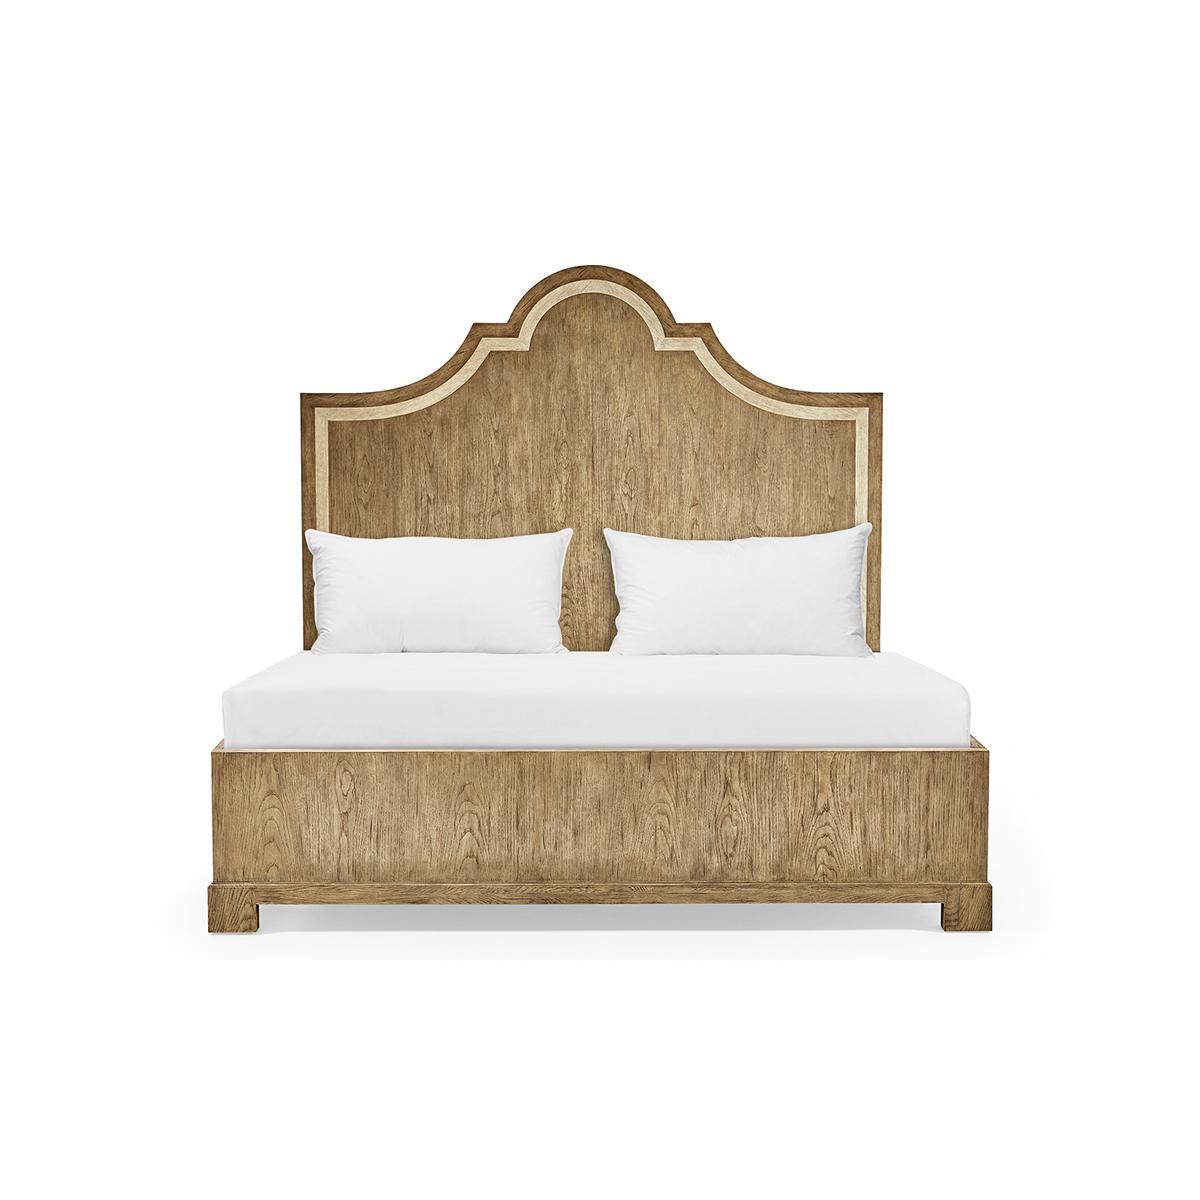 Introducing the Modern oak king size panel bed, the perfect addition to your bedroom that promises to provide you with an unparalleled sleeping experience. Its elegant and striking design boasts gentle yet expressive lines and unique textures that